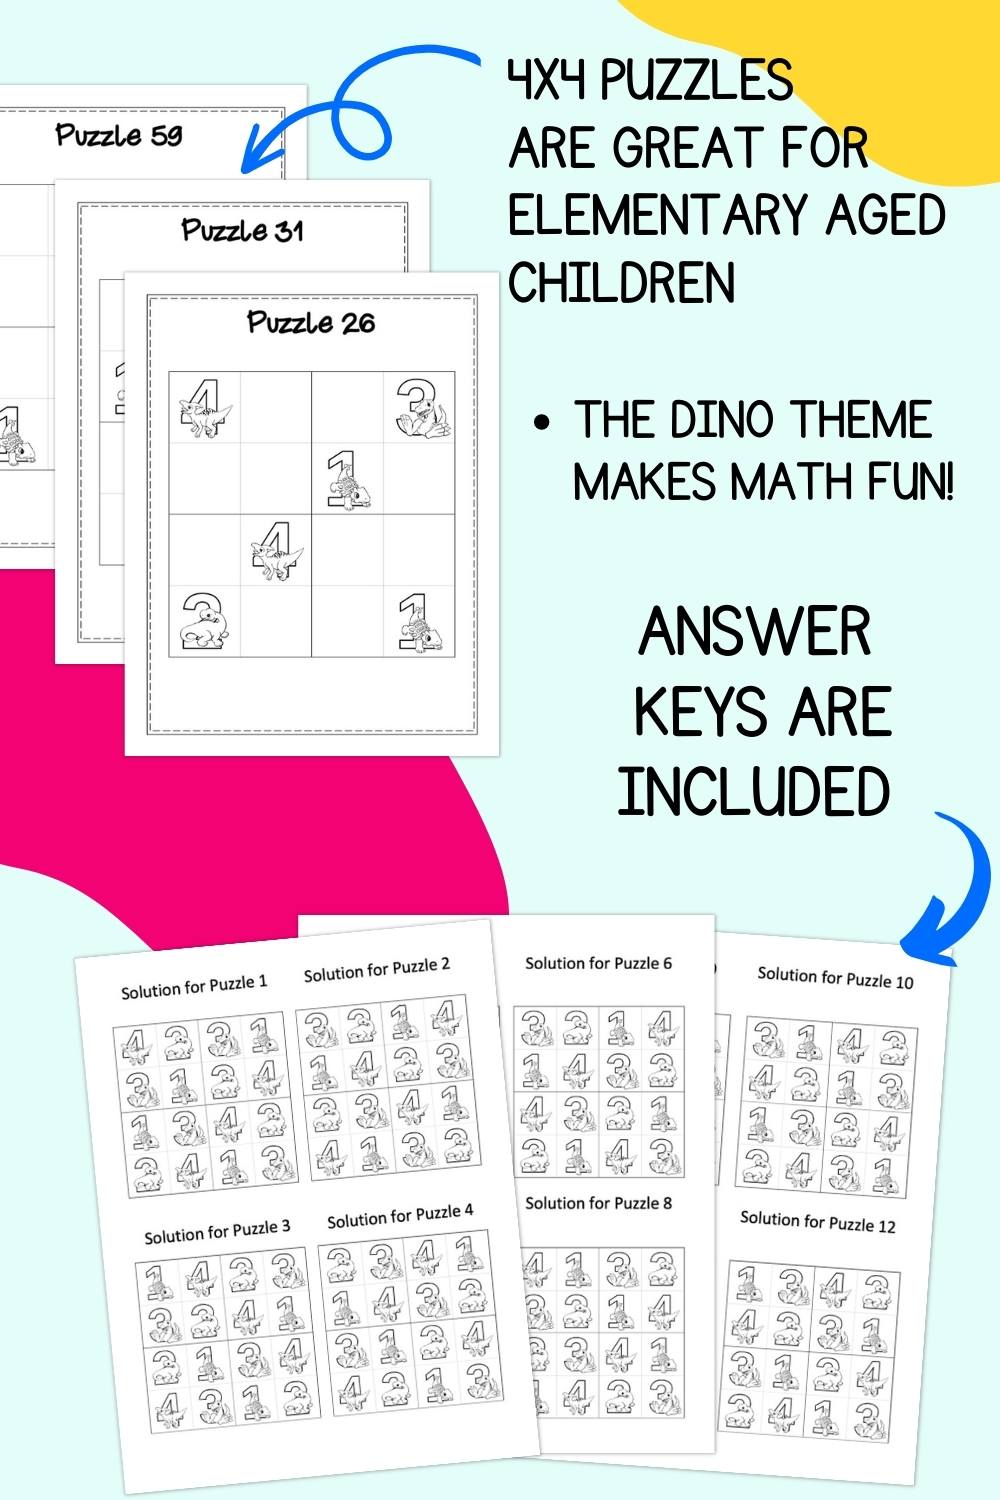 Text "4x4 puzzles are great for elementary aged chidlren" and "answer keys are included" with a preview of three puzzles and three pages of answer key